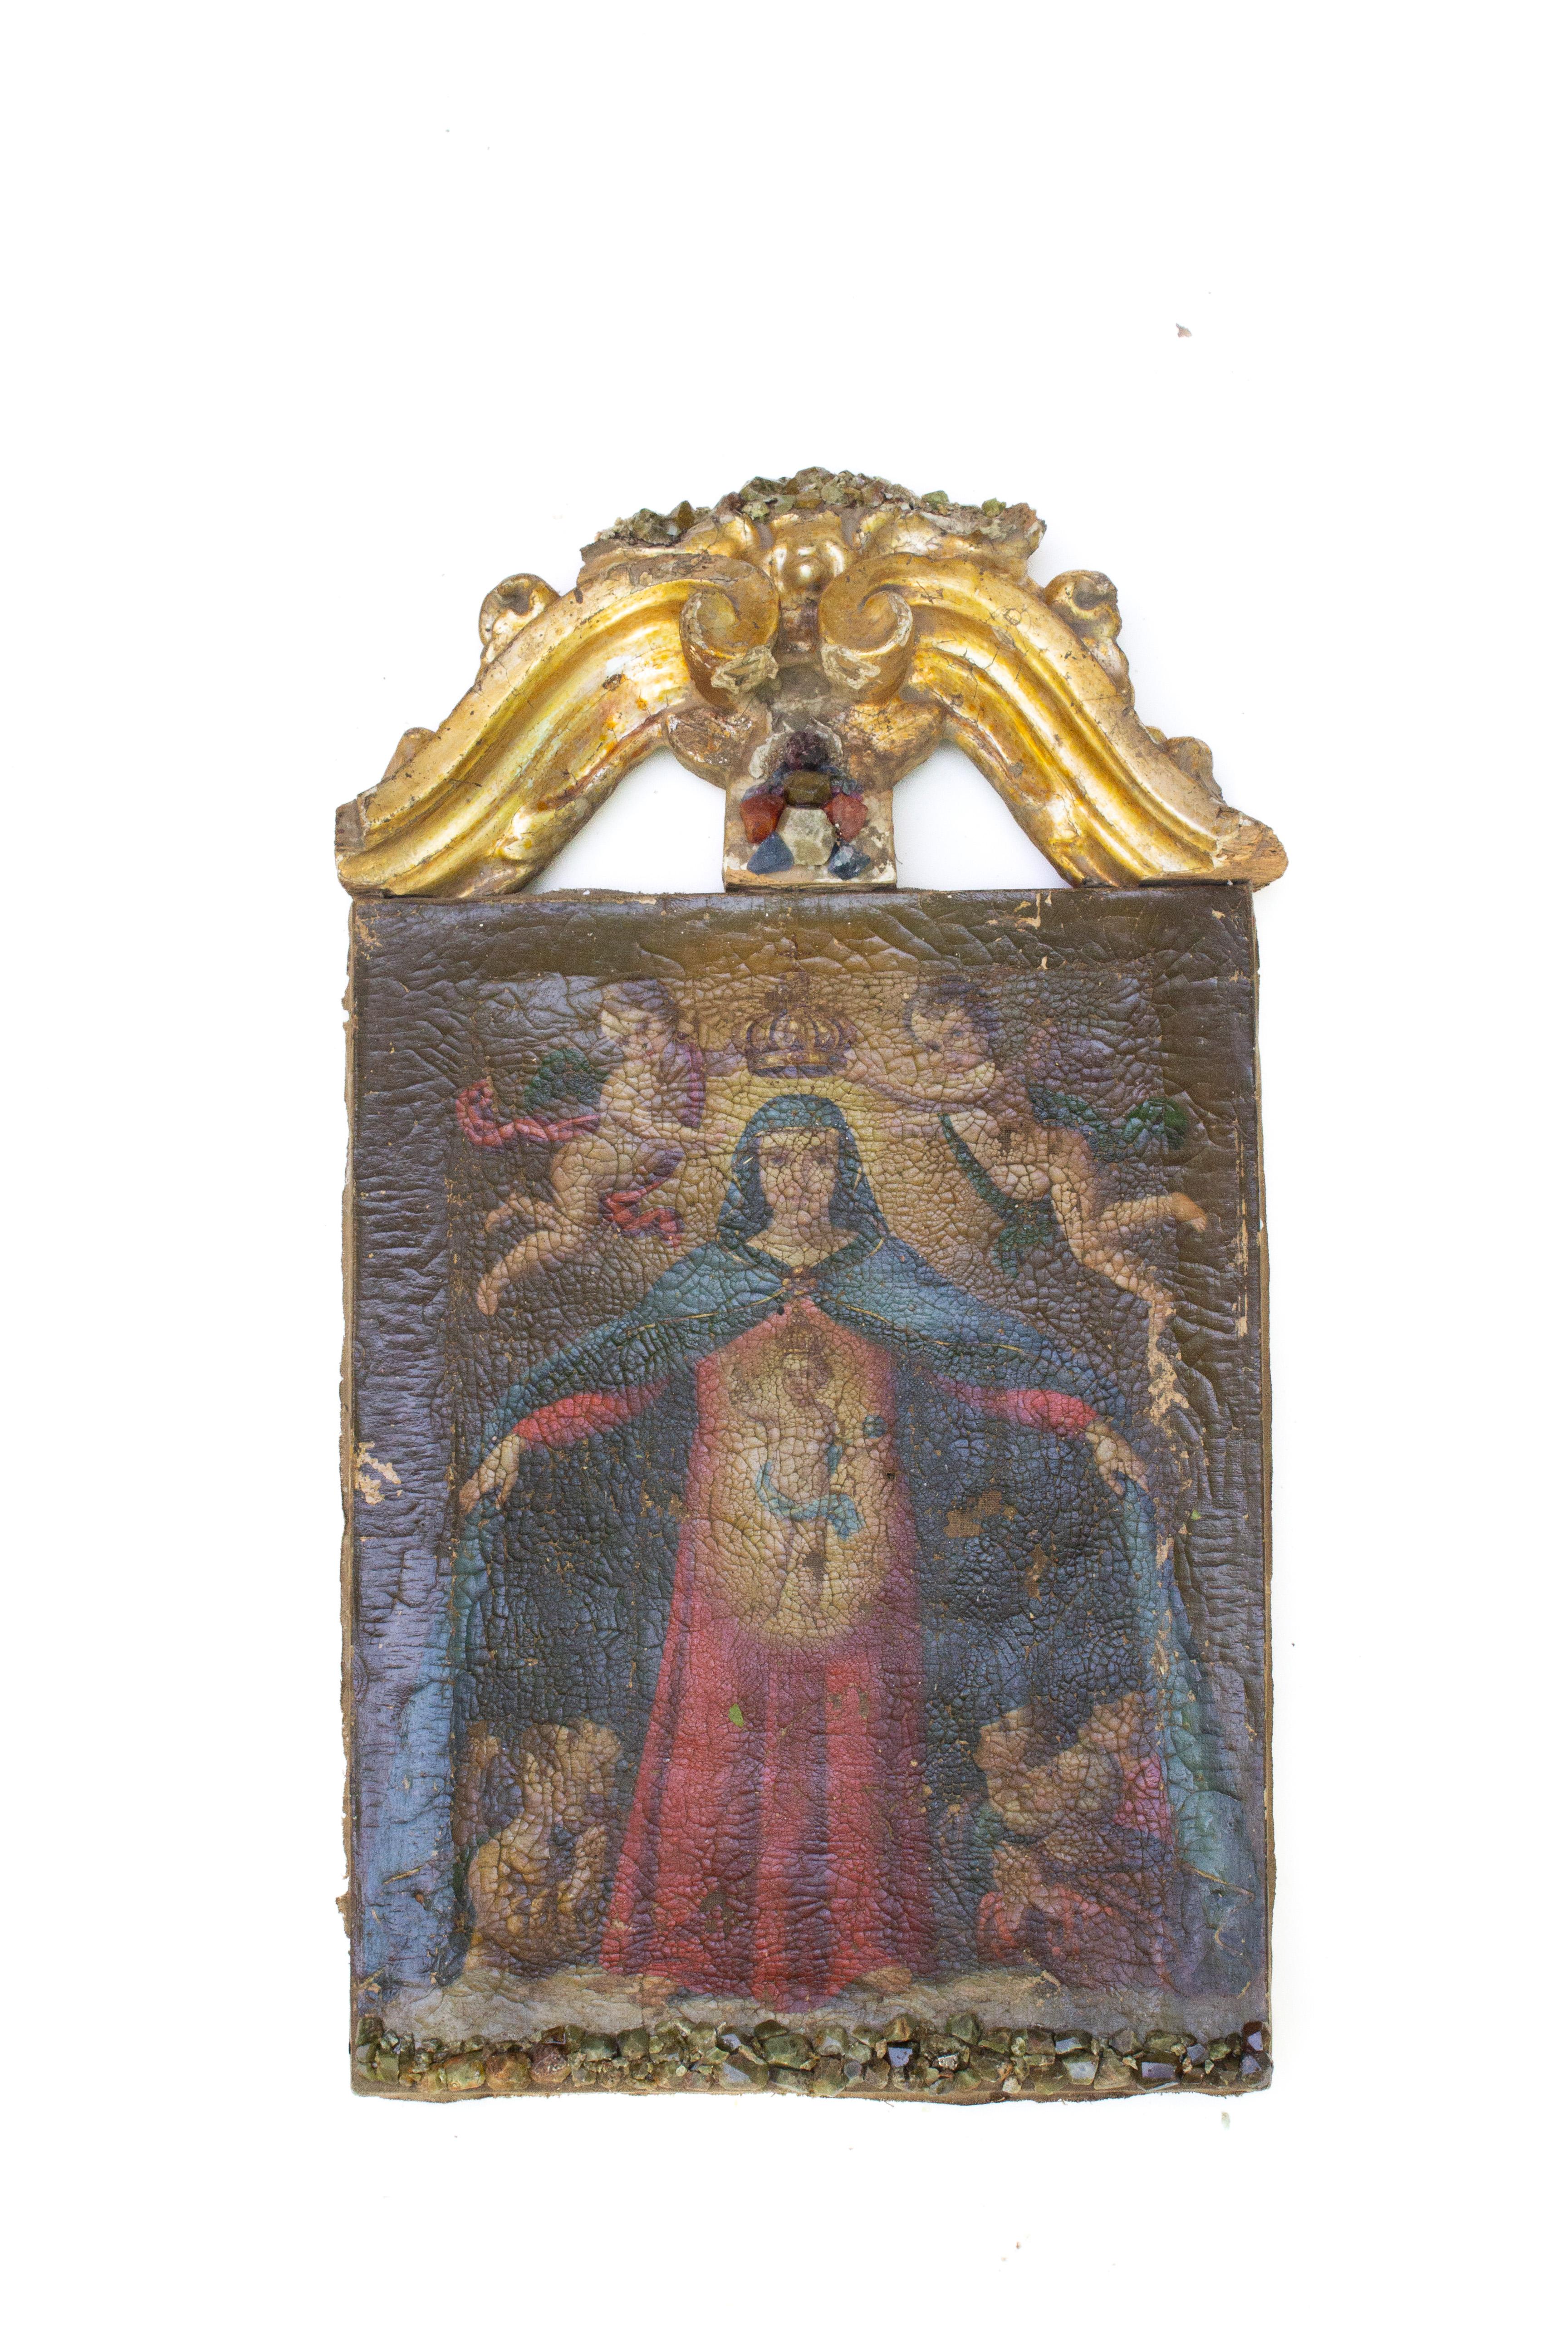 17th century Italian painting of Jesus and Mary adorned with an 18th century Italian gold leaf pediment and bejeweled with green sapphires, carnelian pebbles, garnet, and fluorite. 

The painting depicts Christ inside of the Virgin Mary as he is